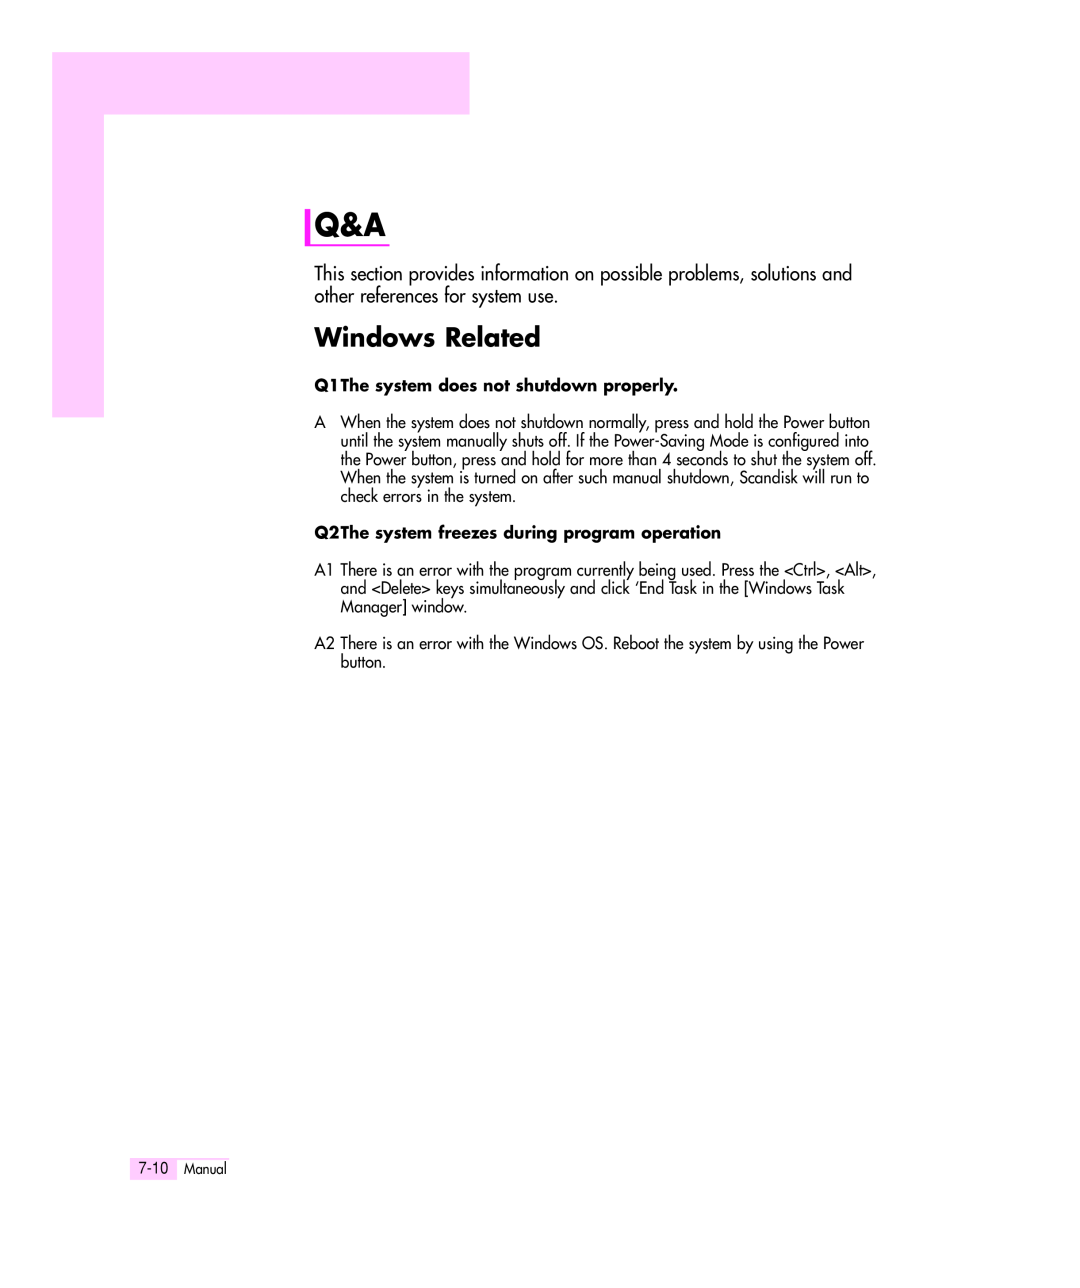 Samsung Q35 manual Windows Related, Q1The system does not shutdown properly, Q2The system freezes during program operation 